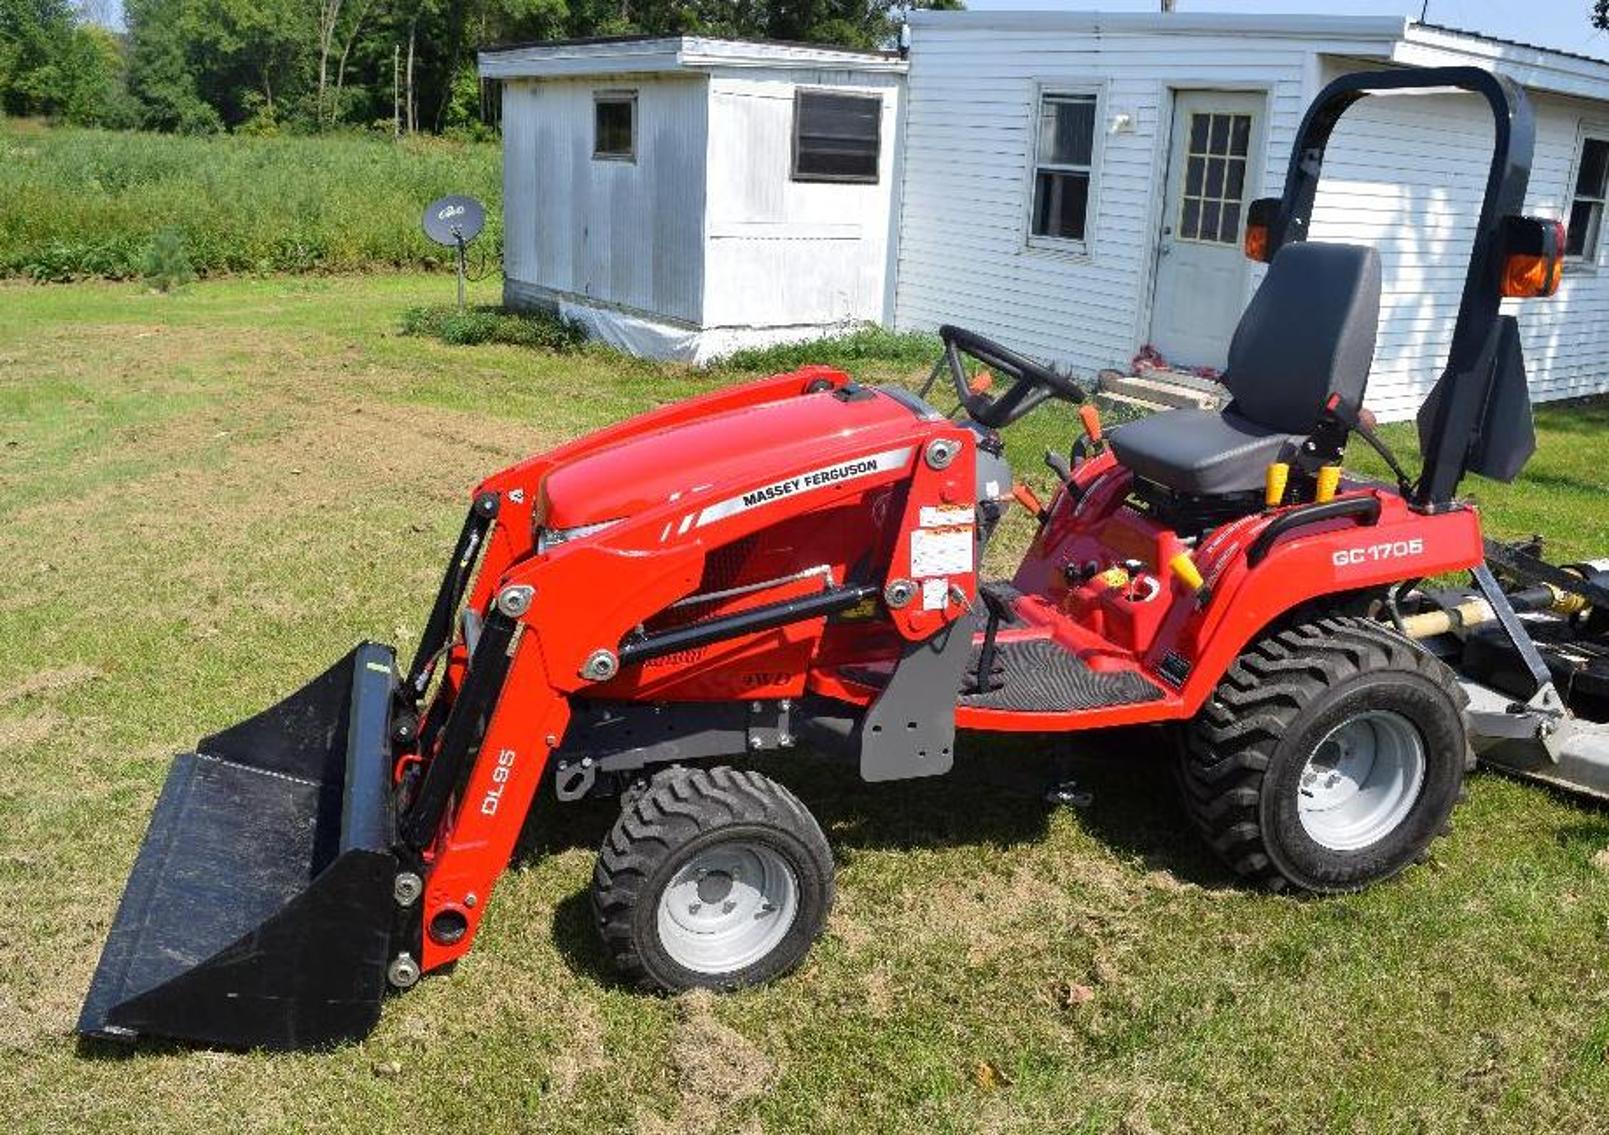 2017 Massey Ferguson GC1705 4WD With DL95 Loader, Finish Mower and Rear Blade